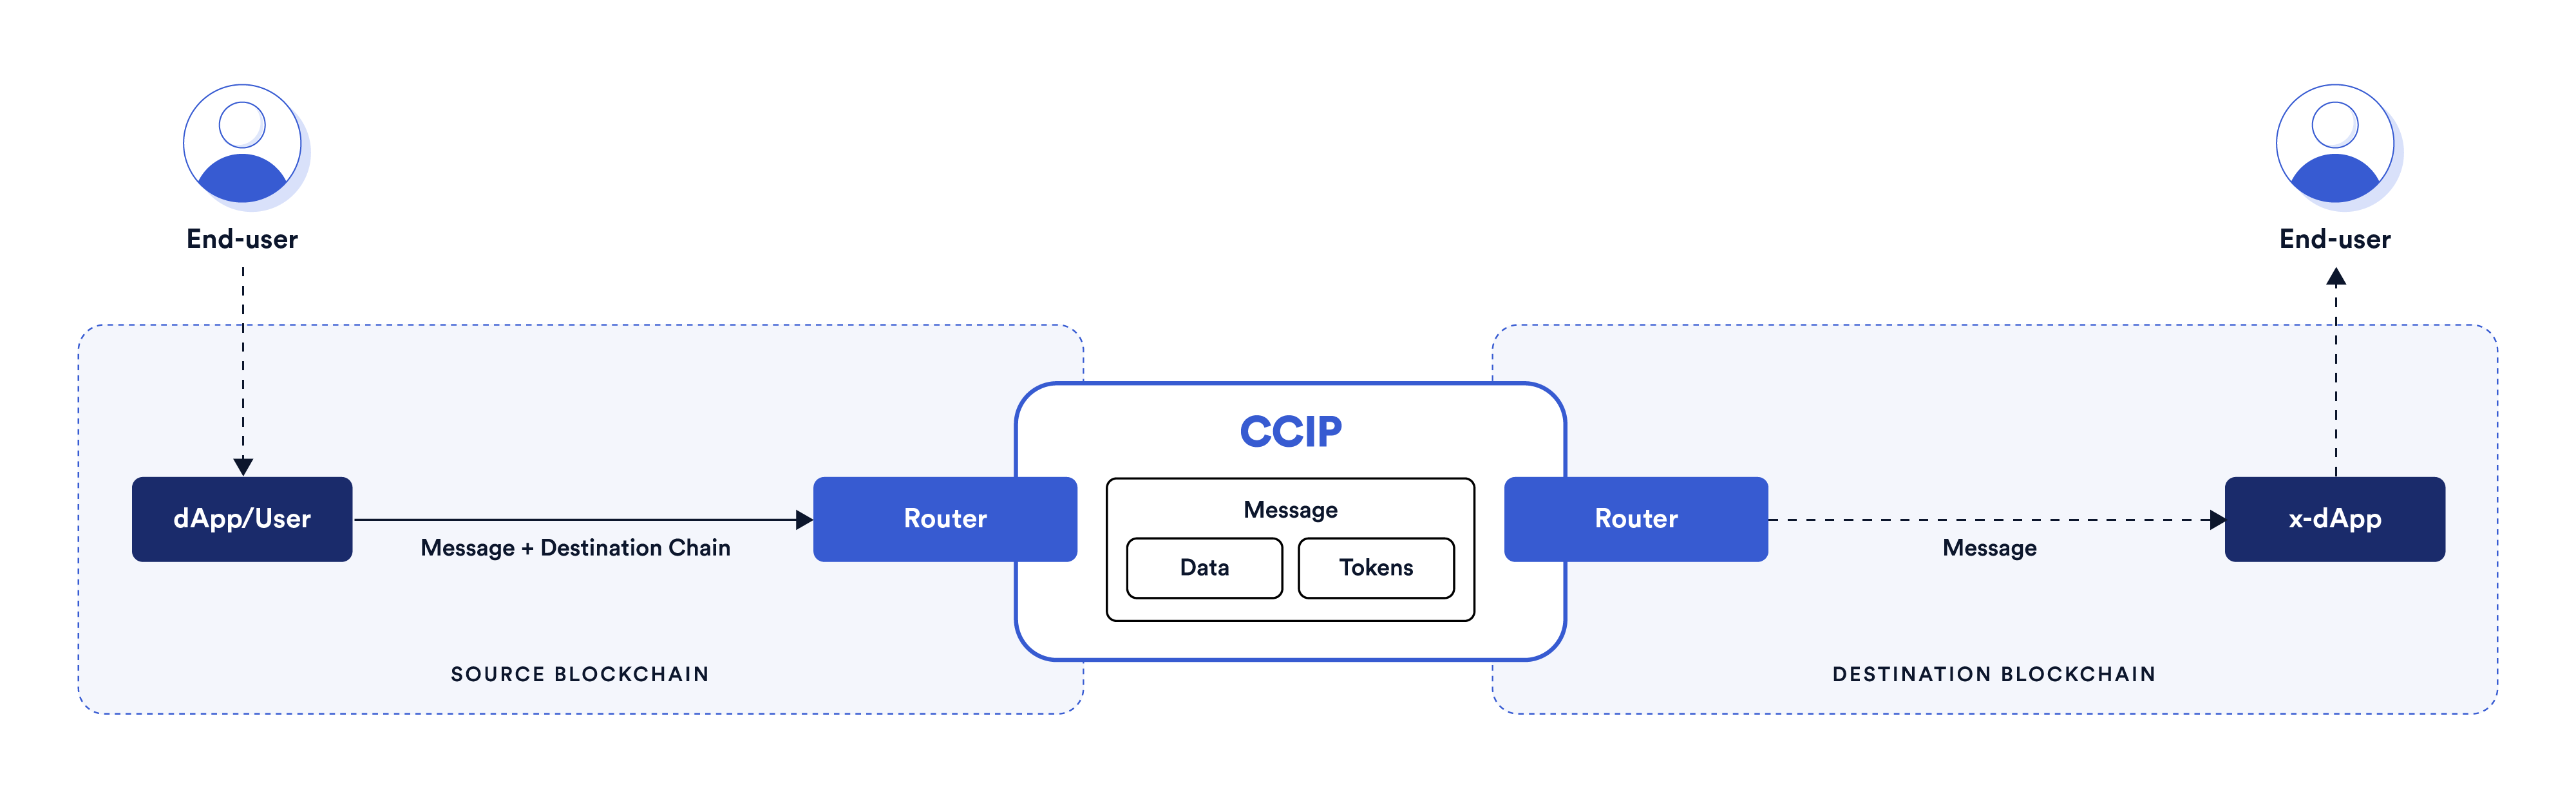 Chainlink CCIP Basic Architecture